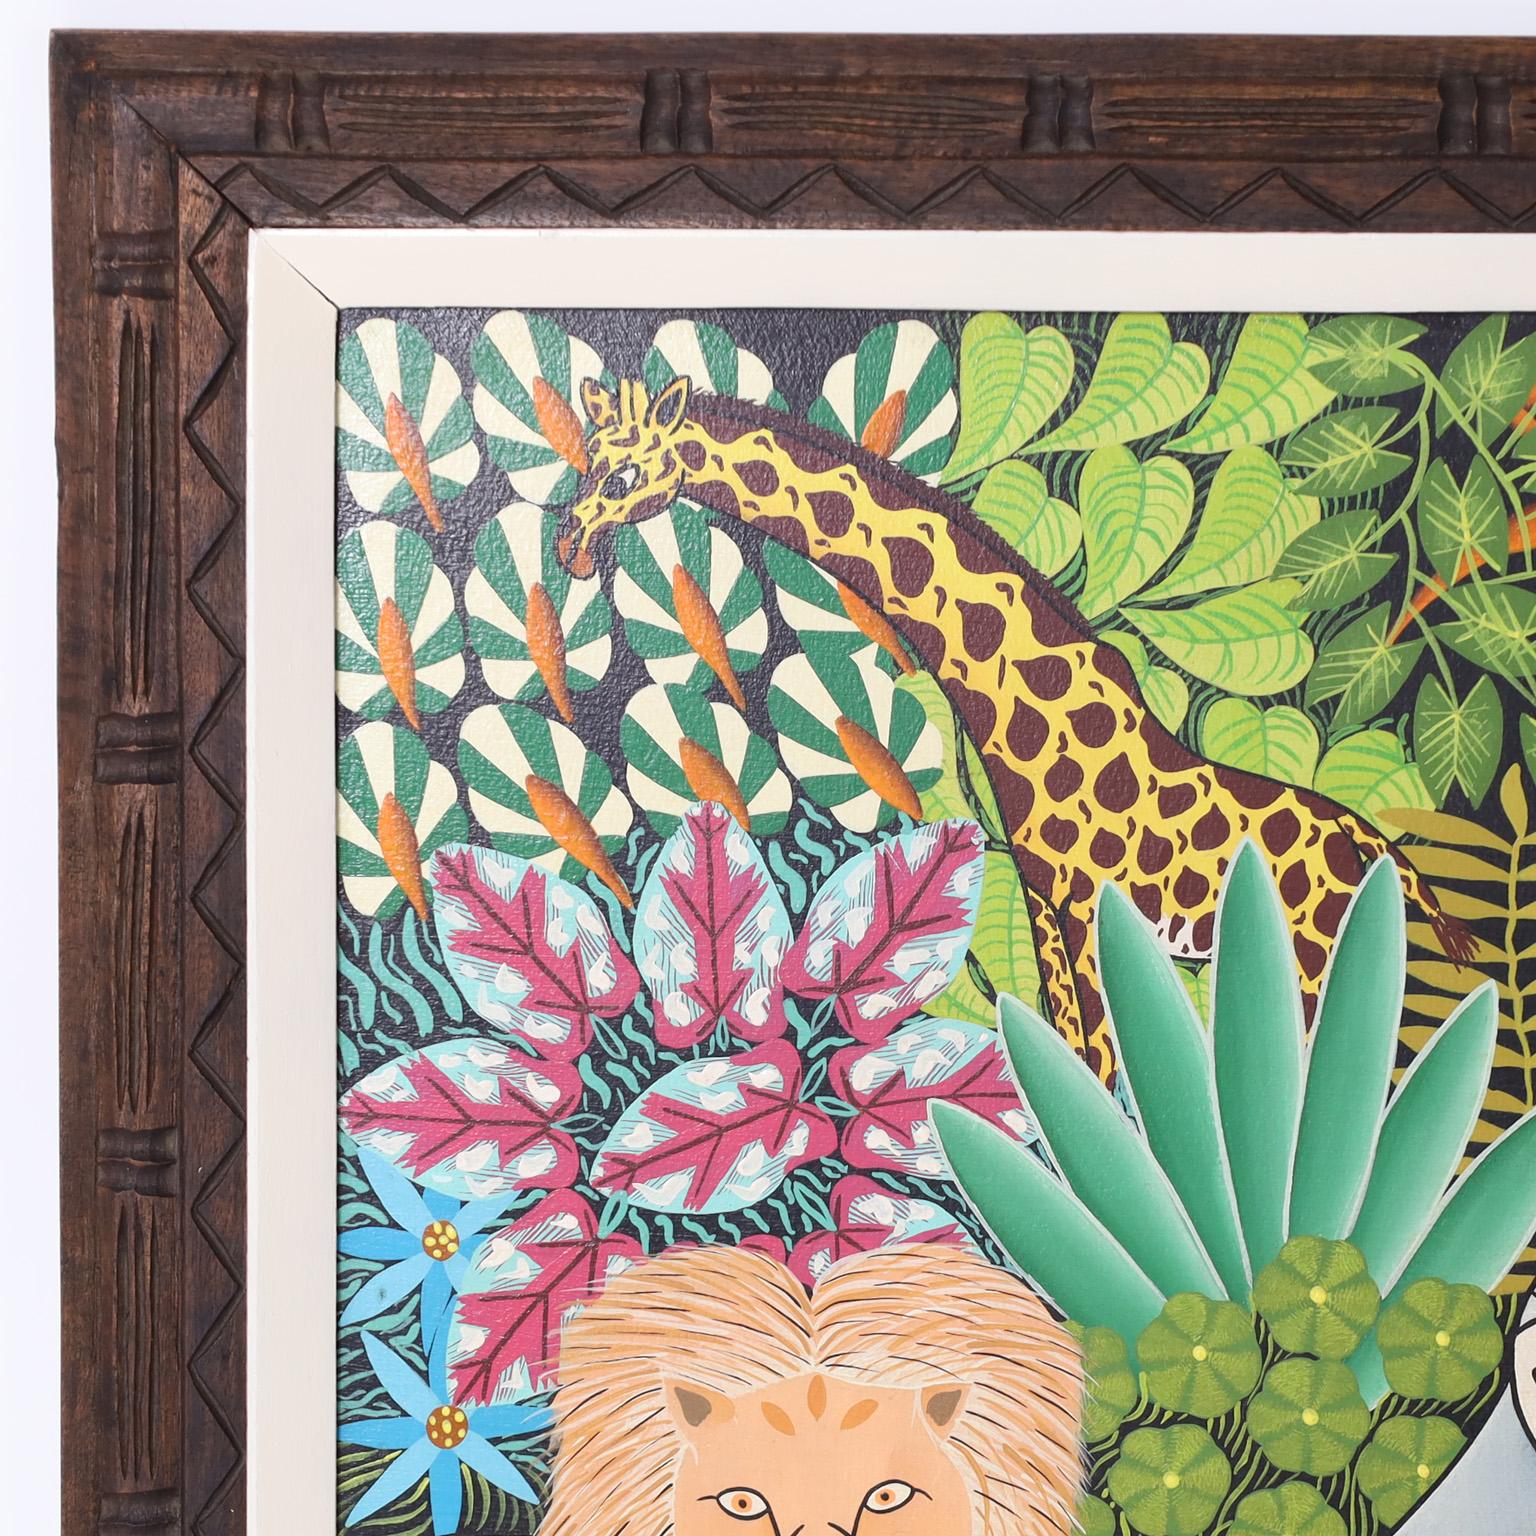 Striking Mid Century tropical painting on canvas executed in a distinctive naive manner with African animals set in a jungle setting. Signed by noted Haitian artist Daniel Souvenir and presented in a carved wood frame.